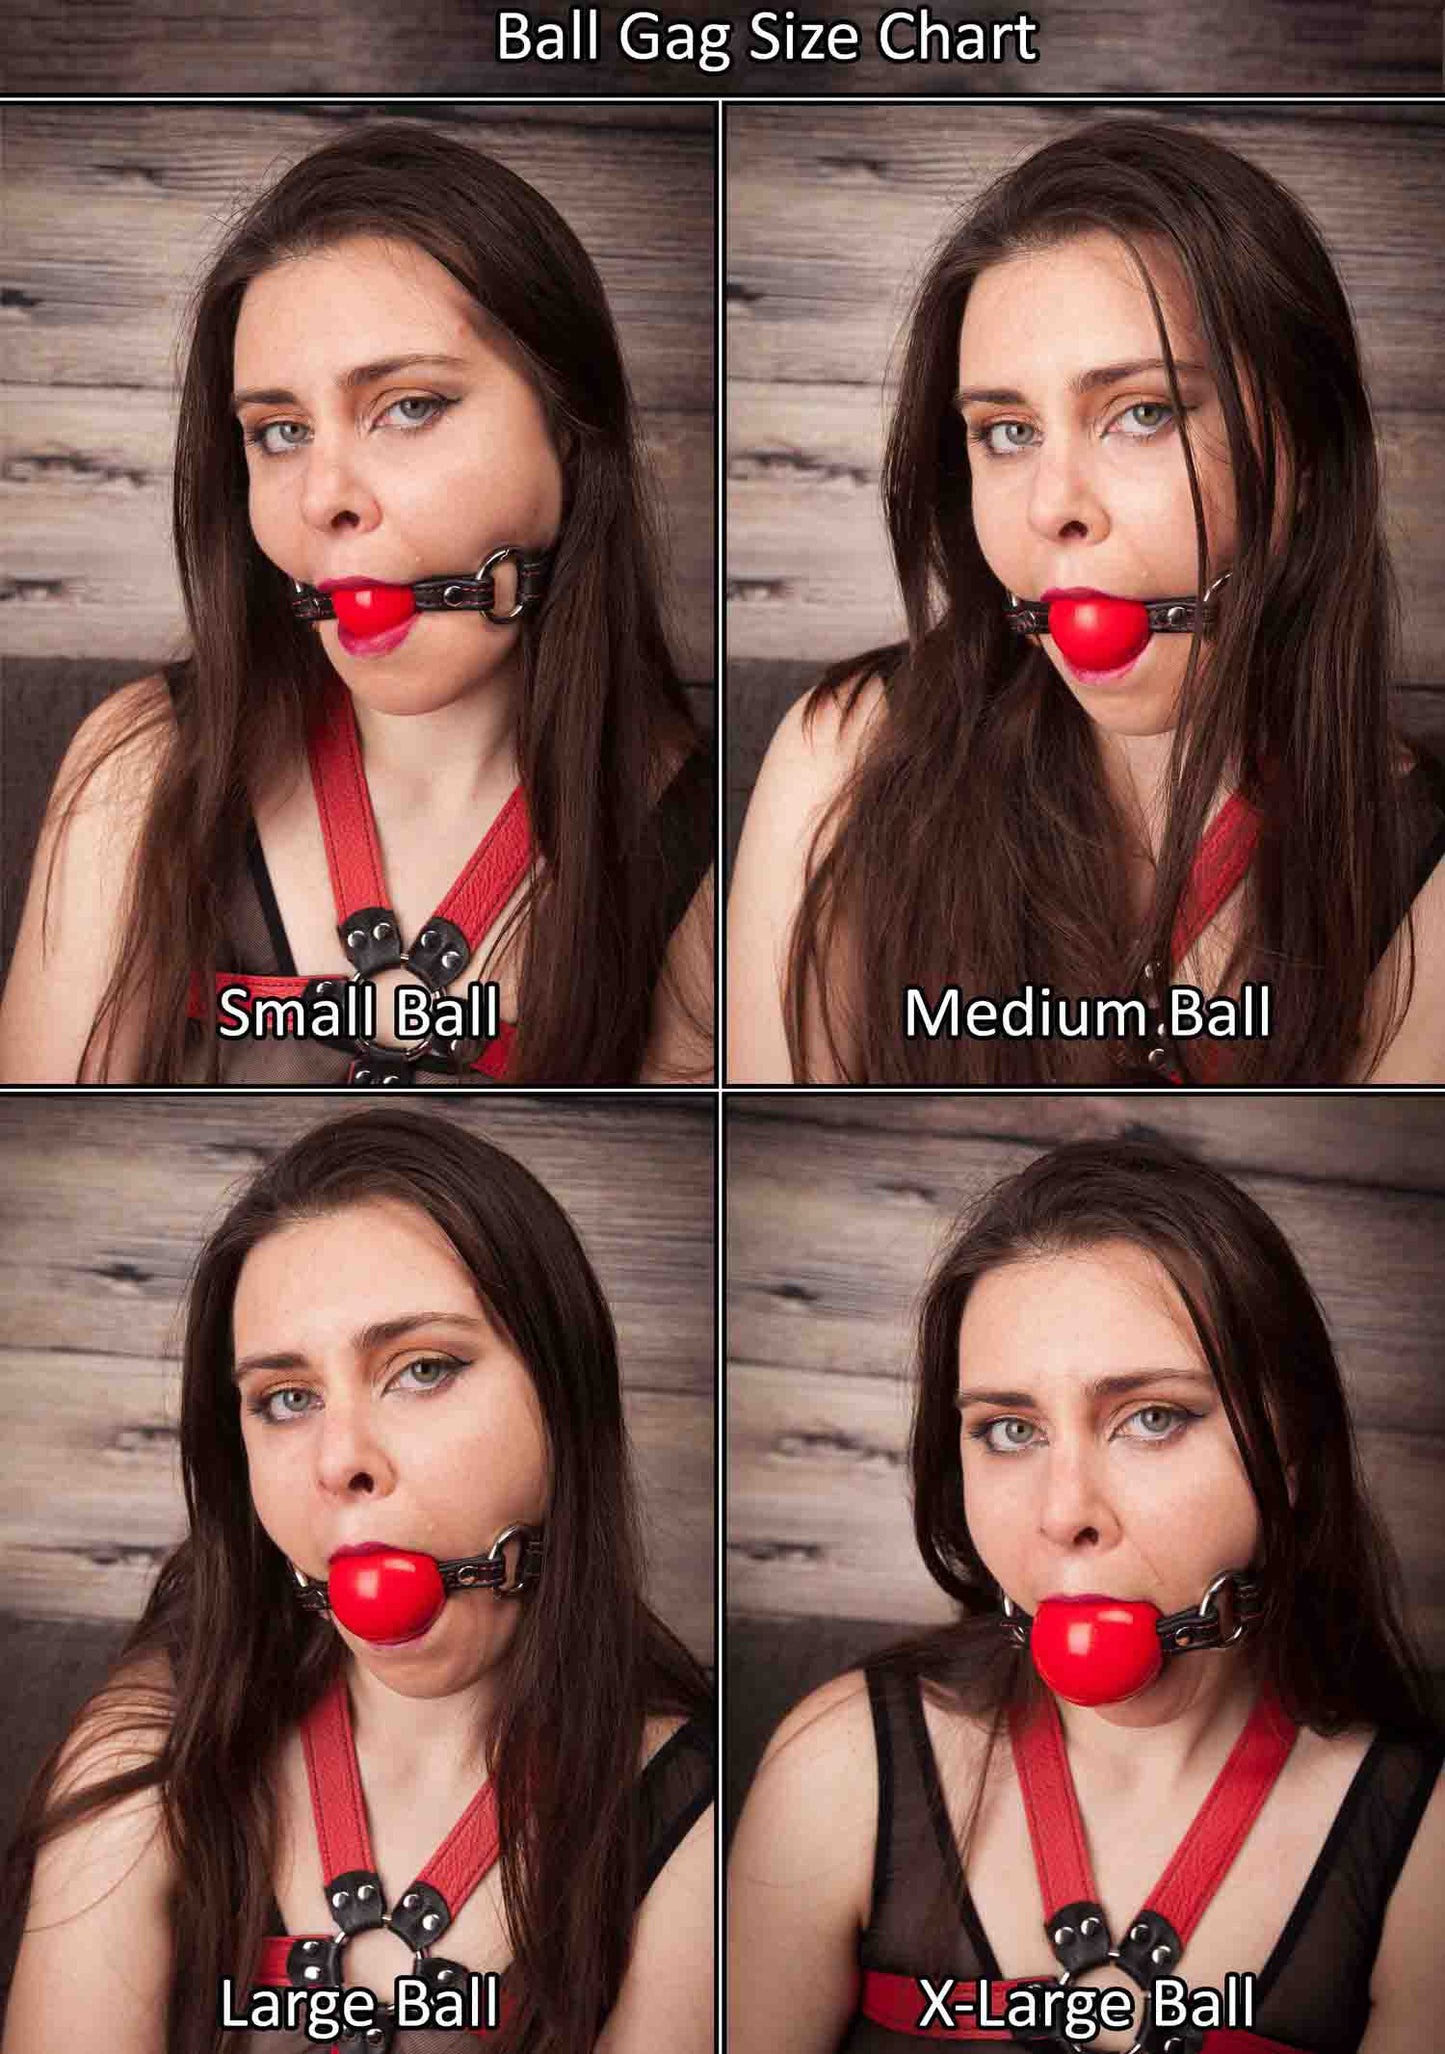 The ball gag size chart with a composite of four photos of the same person wearing different sized red ball gags.